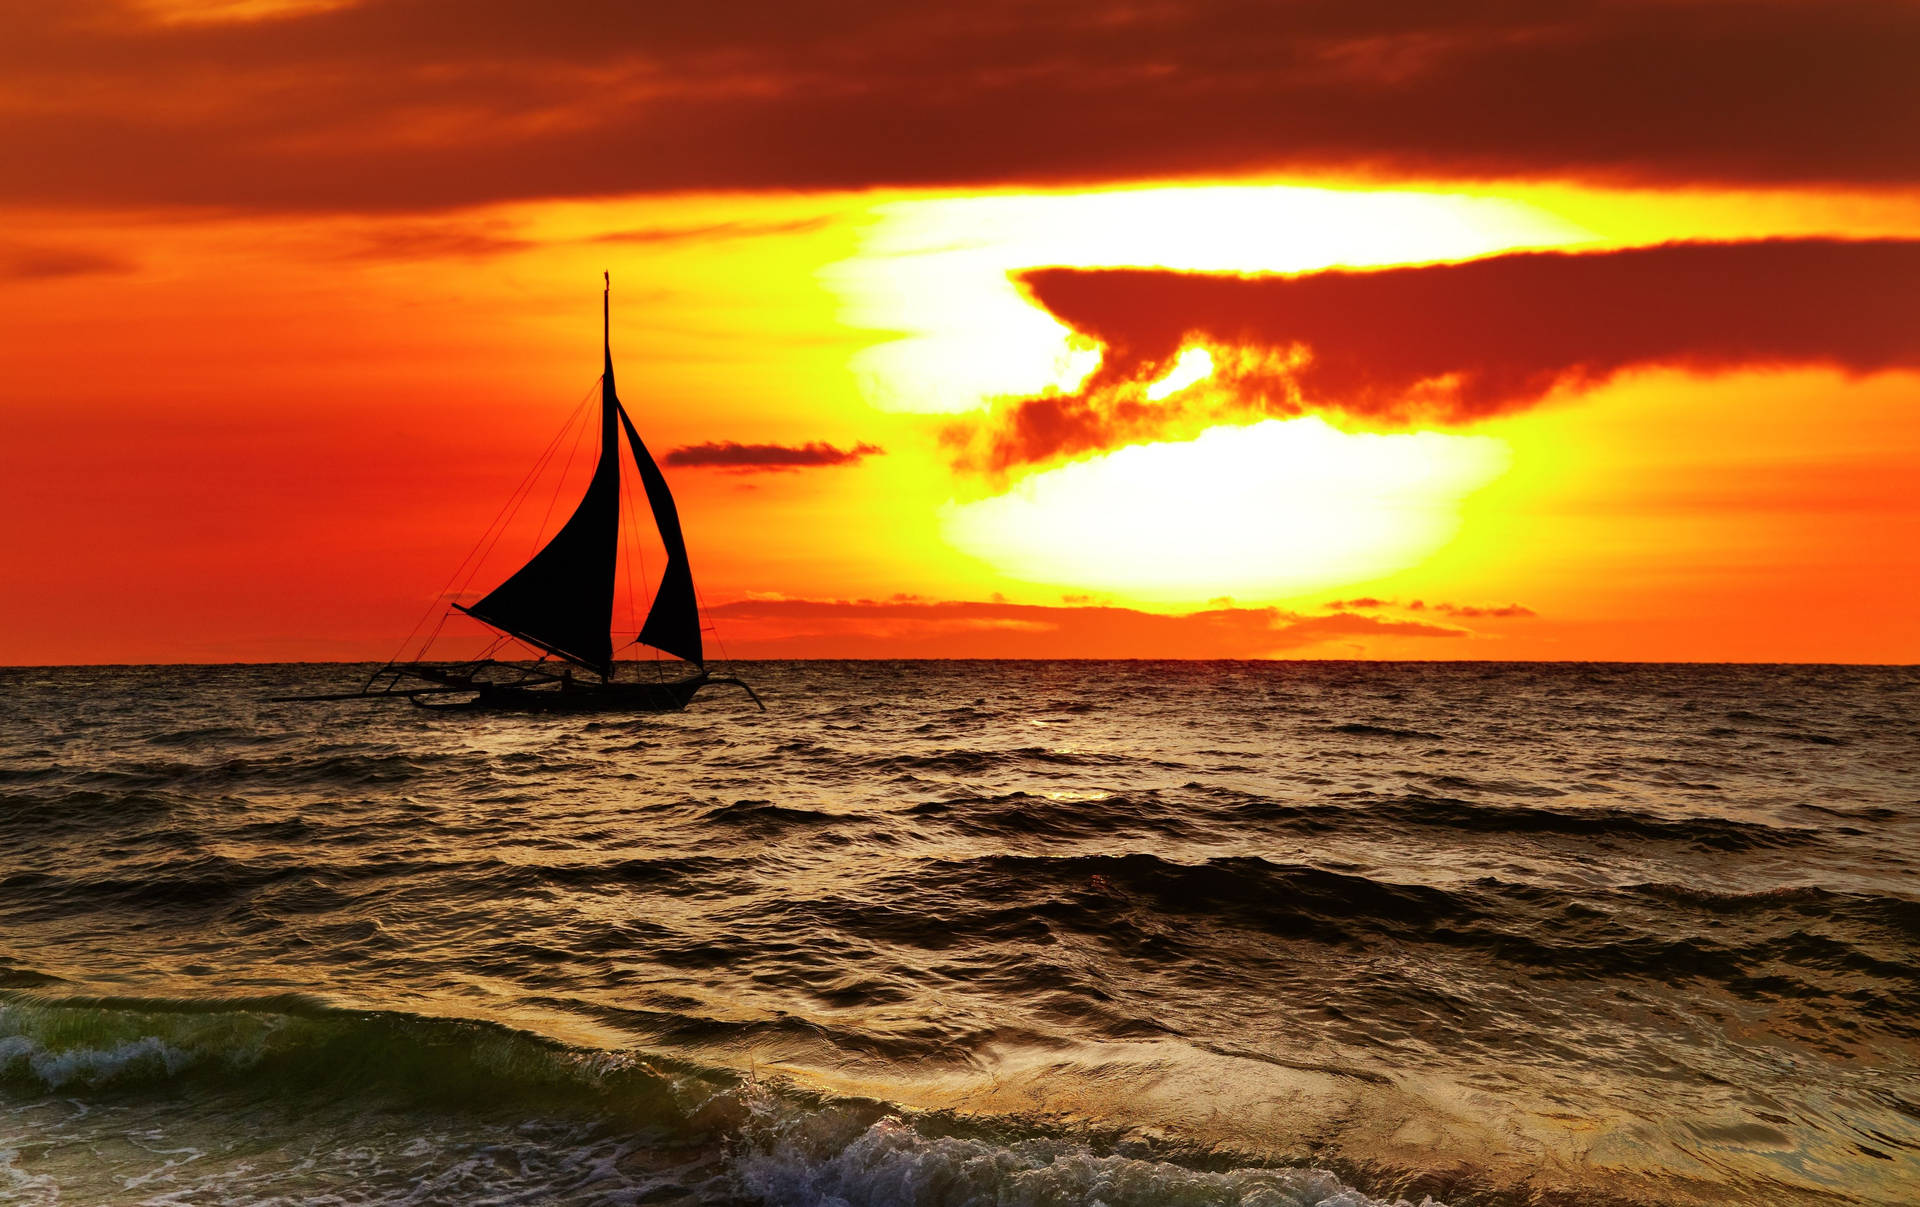 Boat At Sunset In Philippines Sea